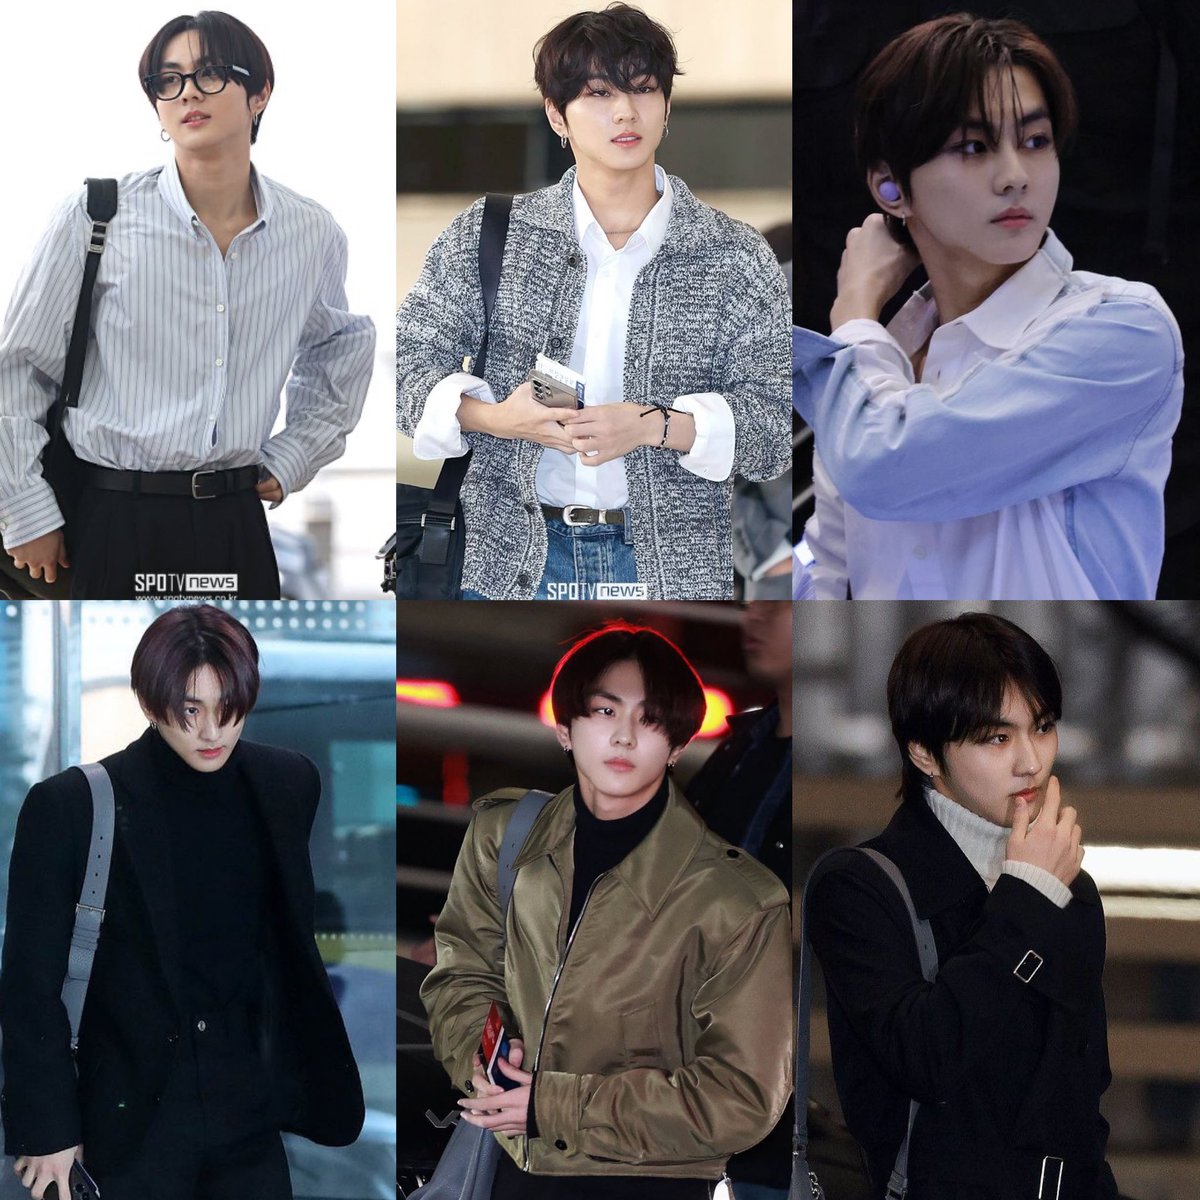 jungwon’s airport fits >>>